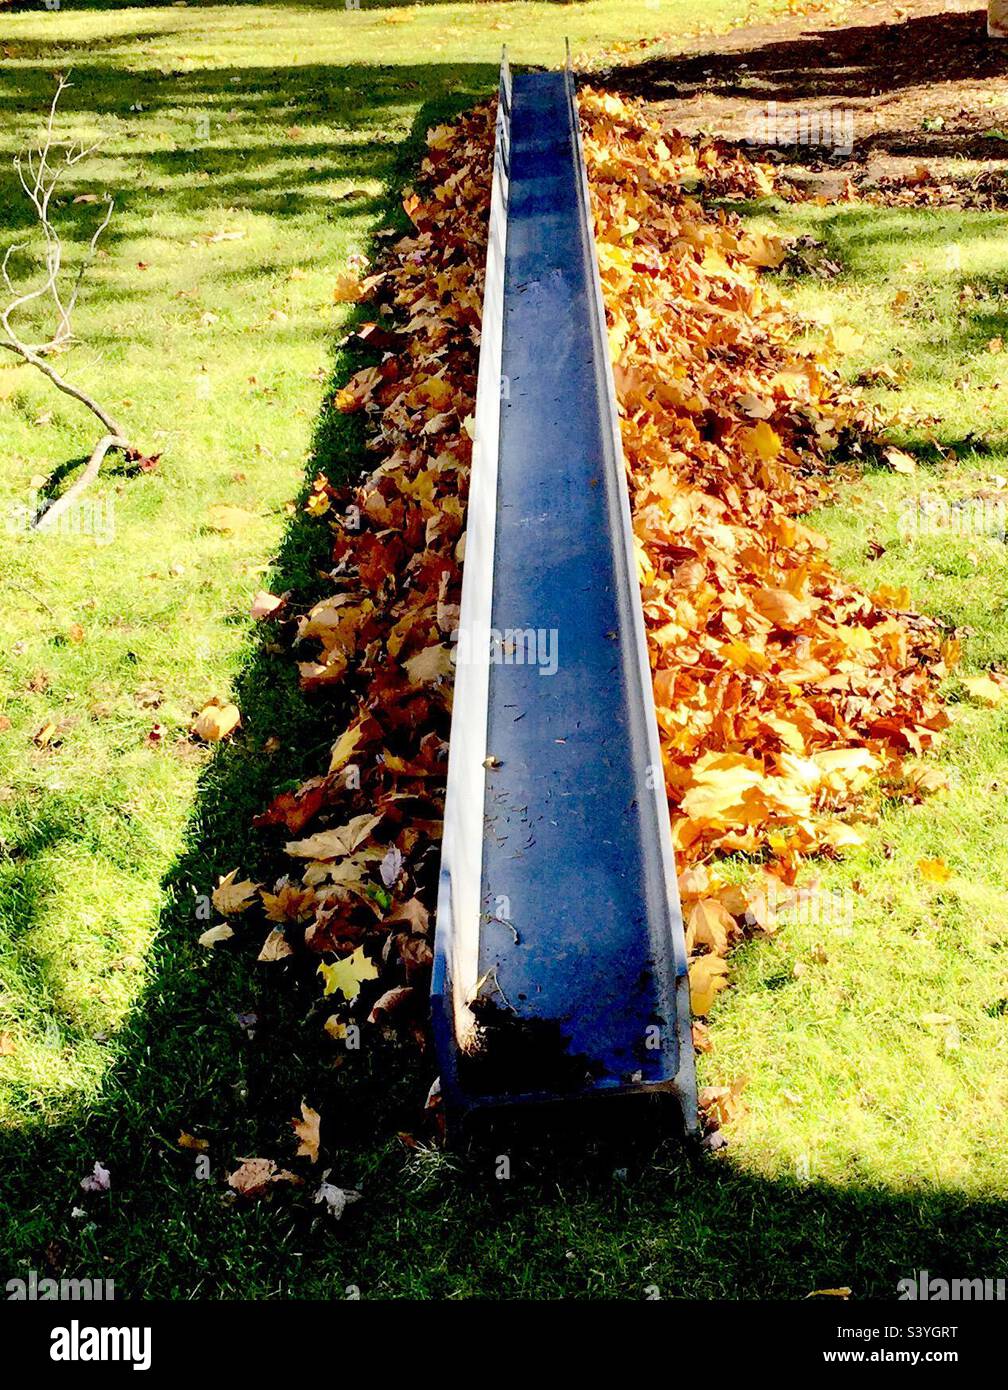 Steel beam and fallen leaves lying on the ground. Nature soft, man made object hard. Juxtaposition. Hard soft. Stock Photo